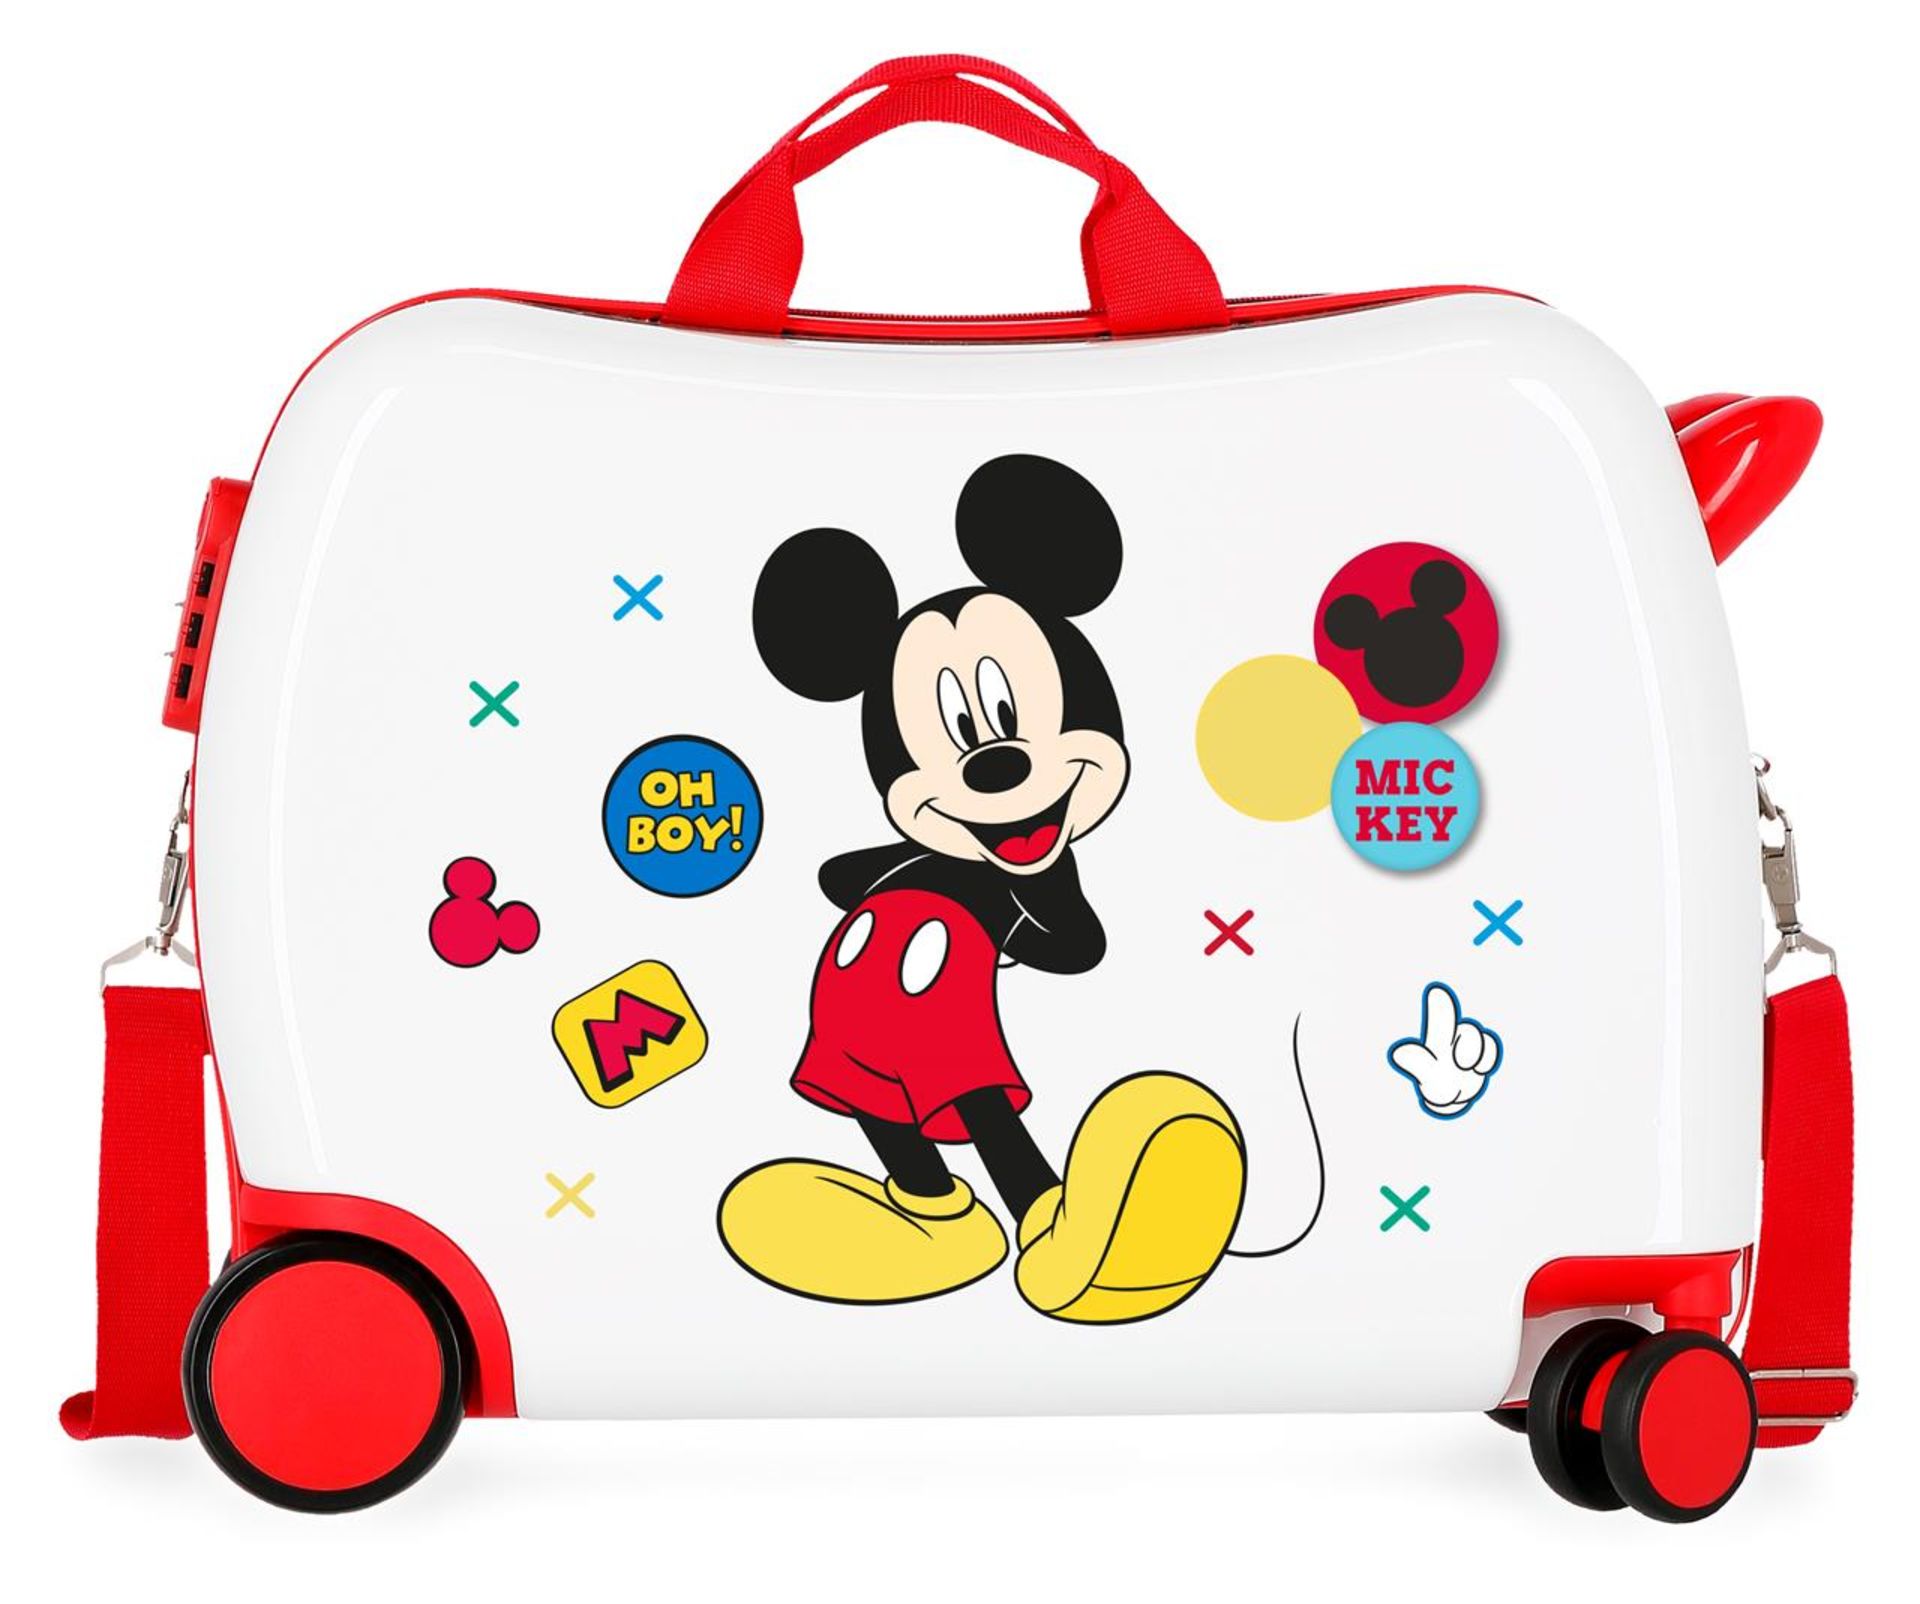 Pallet Of 48 Joumma Bags Rolling Suitcases In Various Disney Designs And Colours 50X38X20 Cm - Image 88 of 102